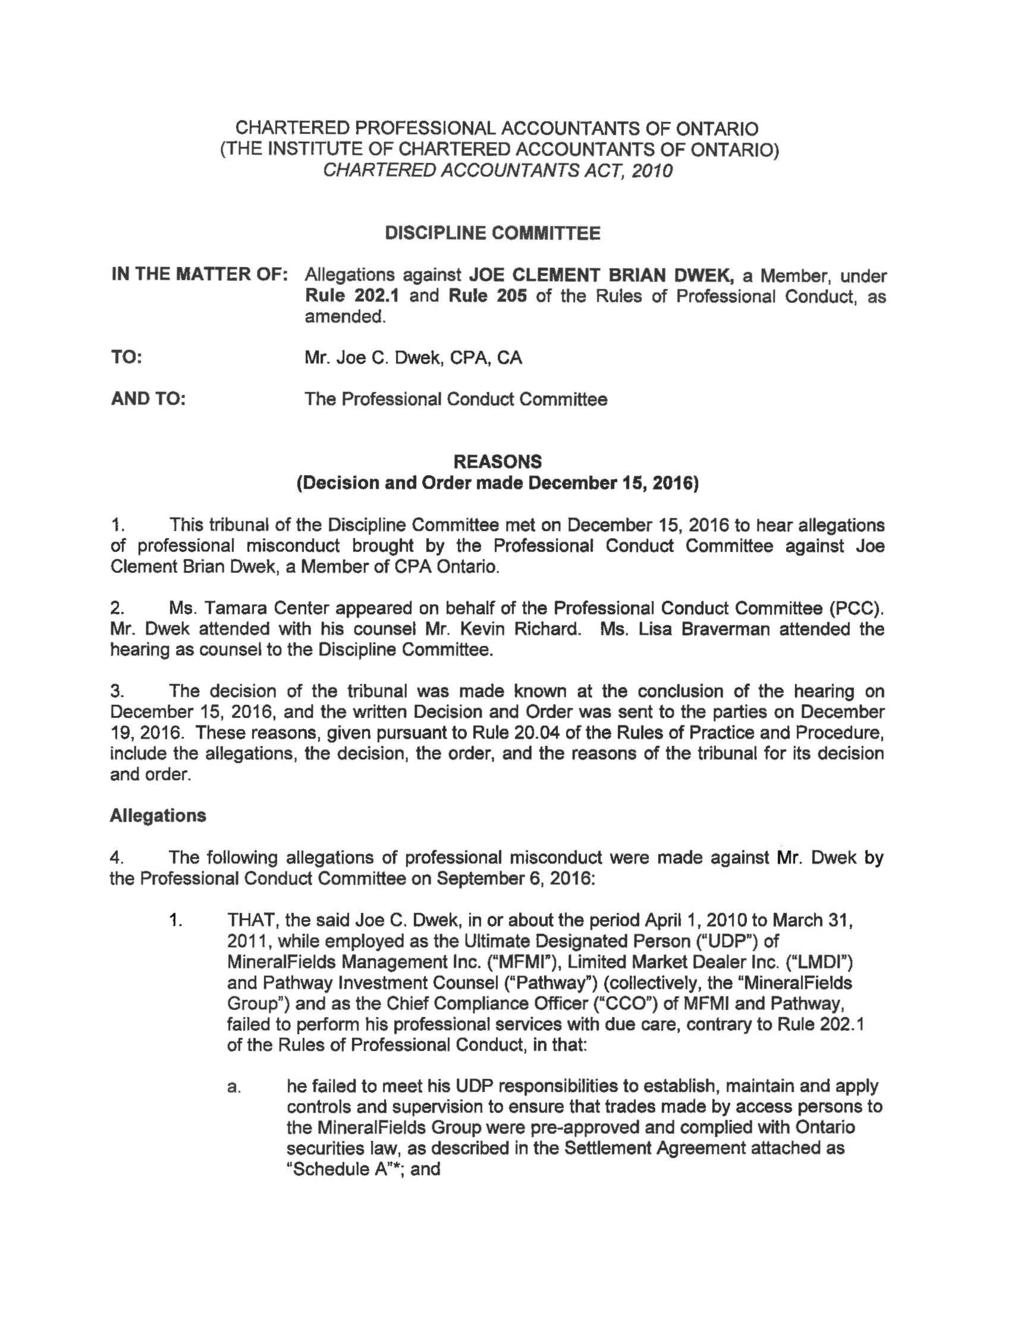 CHARTERED PROFESSIONAL ACCOUNTANTS OF ONTARIO (THE INSTITUTE OF CHARTERED ACCOUNTANTS OF ONTARIO) CHARTERED ACCOUNTANTS ACT, 2010 DISCIPLINE COMMITTEE IN THE MATTER OF: Allegations against JOE